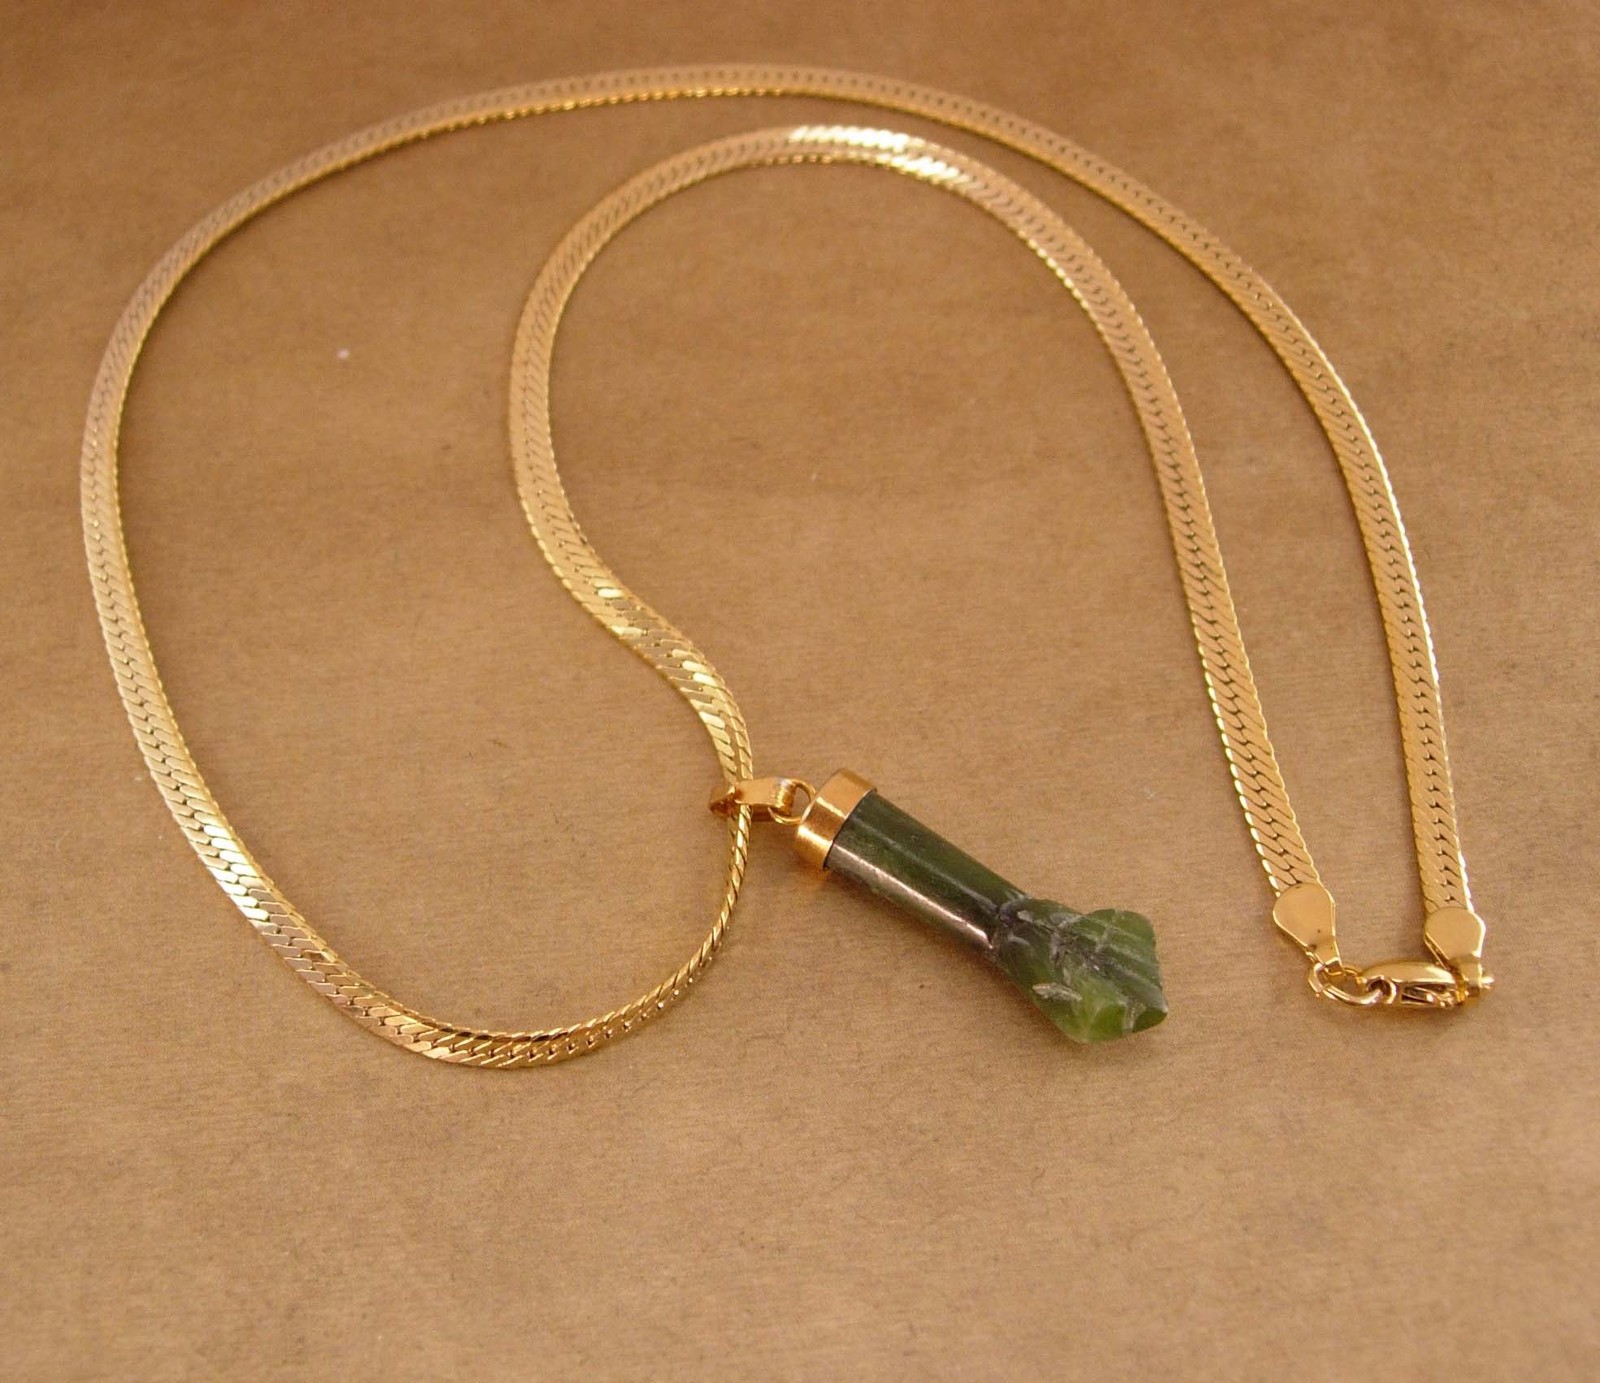 Primary image for Vintage Cornicello horn Jade necklace - Italian pendant - Good luck gift - Figar